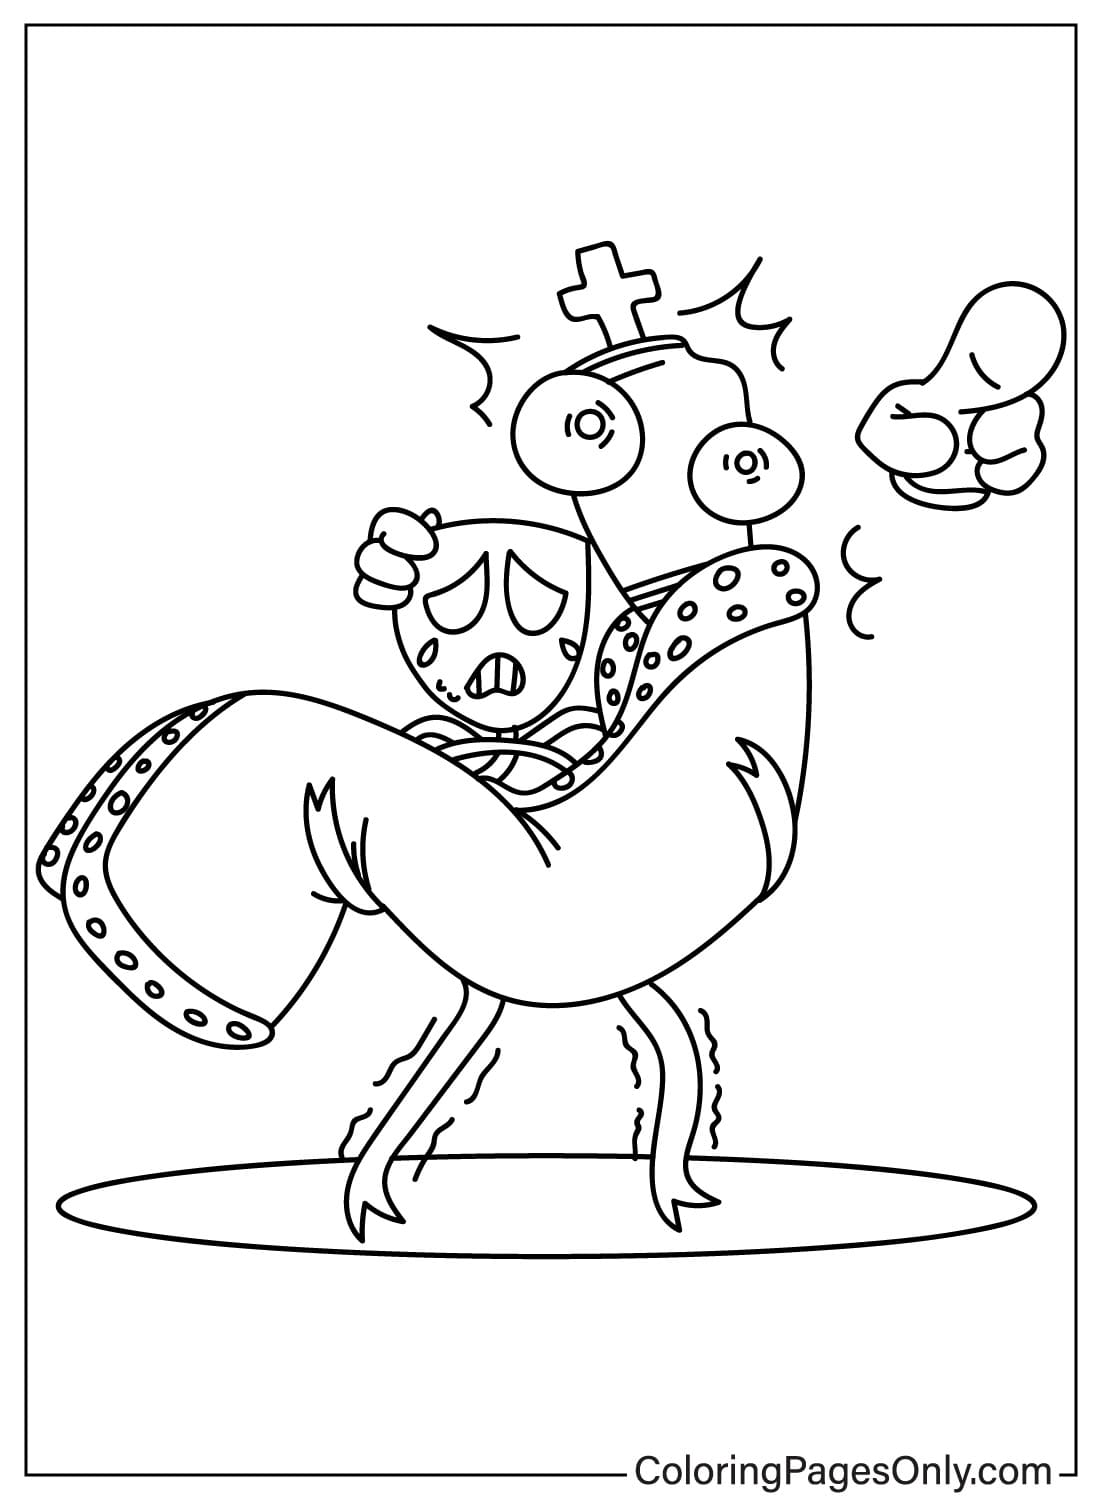 Gangle and Kinger Coloring Page from Gangle